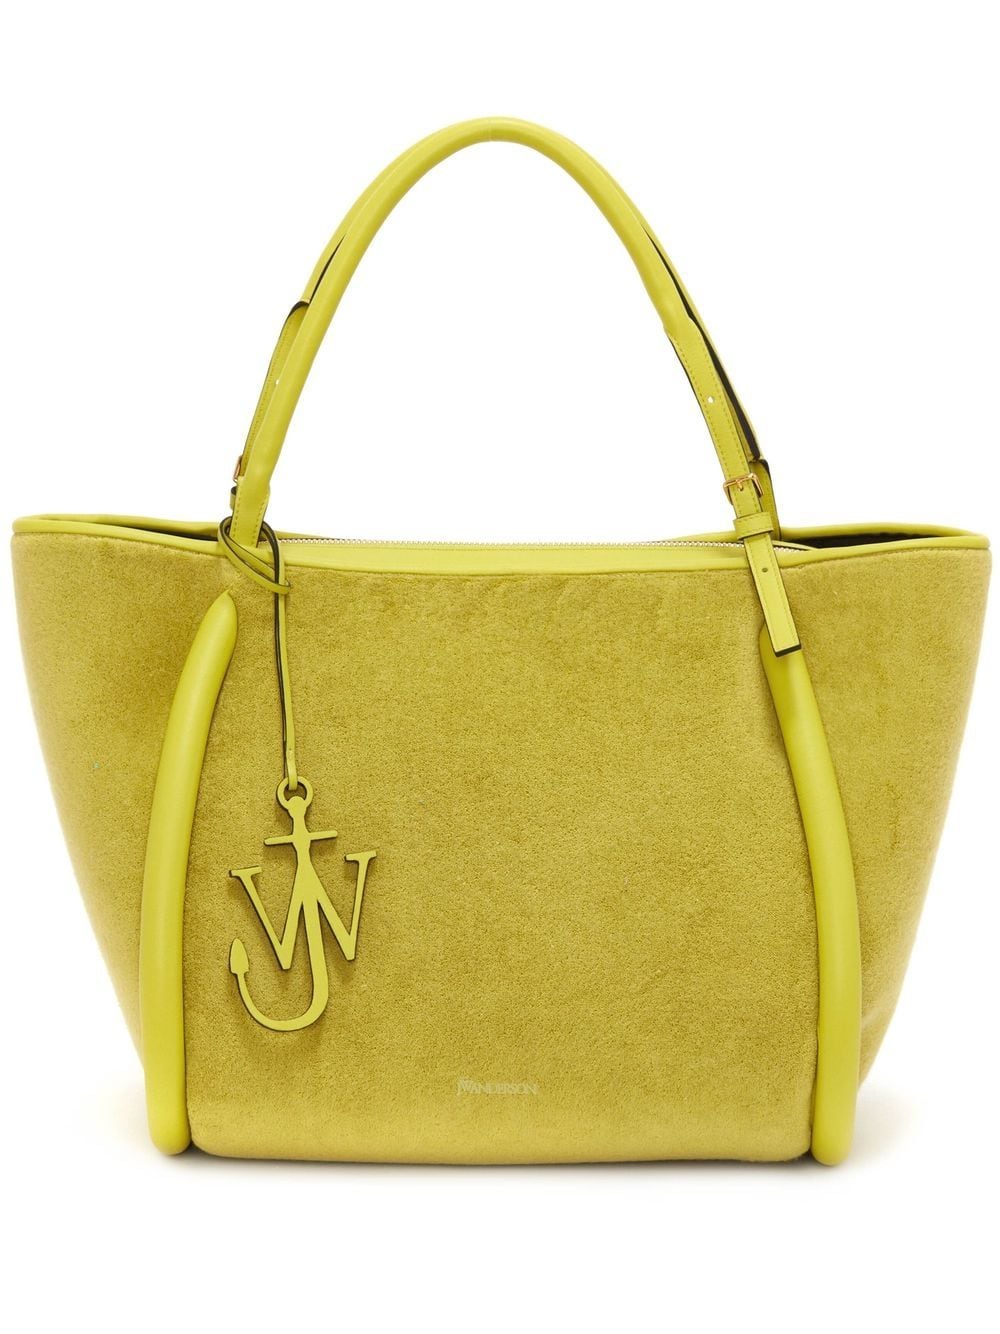 JW Anderson Bumper 31 Terry Towel tote bag - Yellow